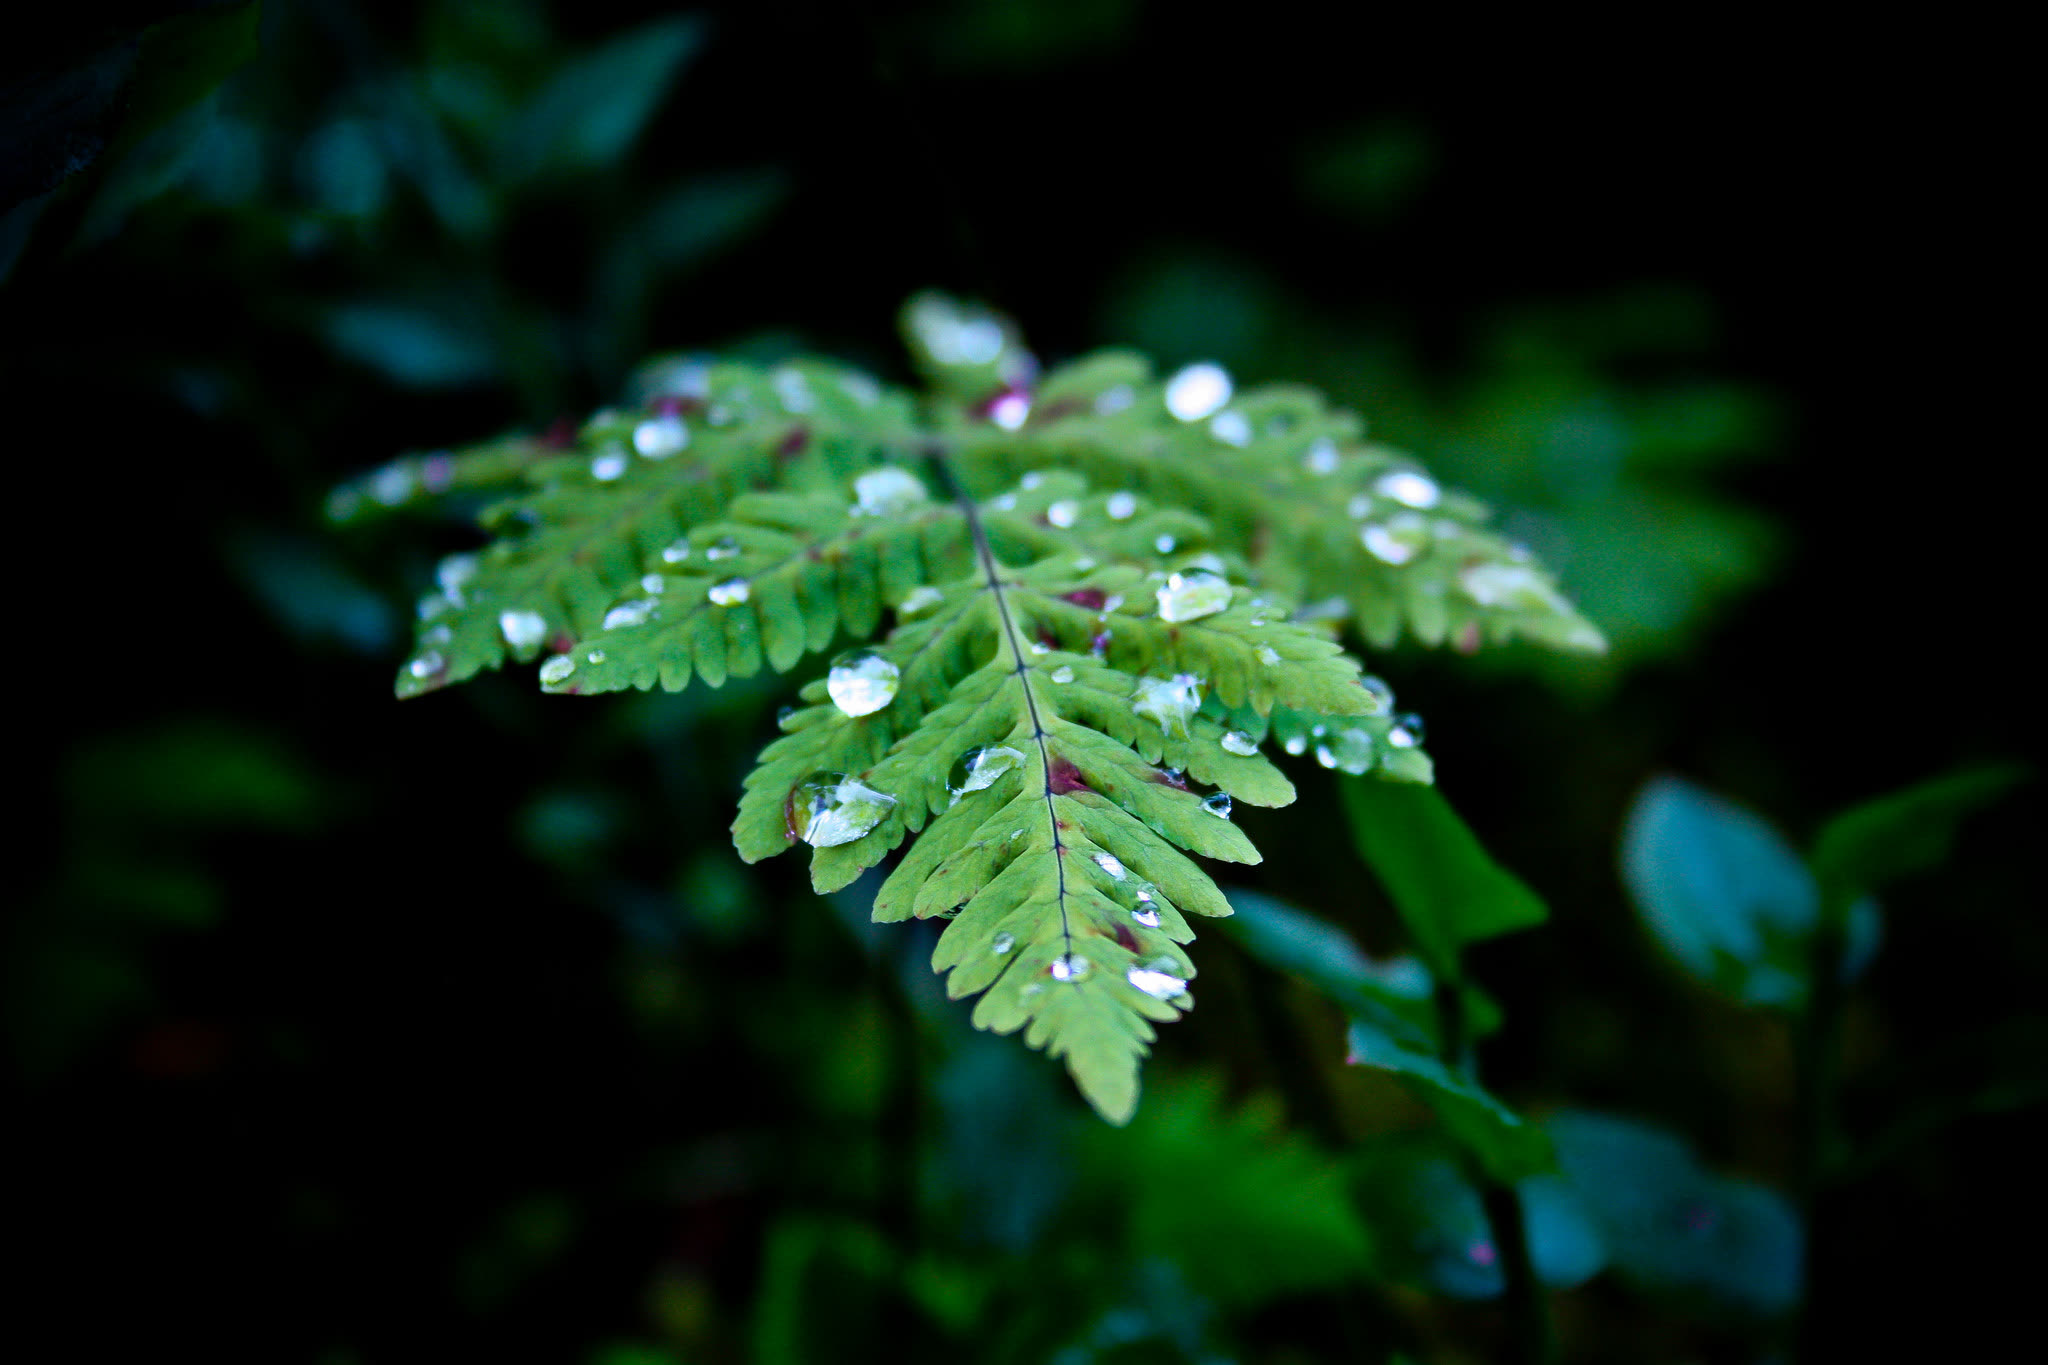 General 2048x1365 plants leaves water drops outdoors closeup nature